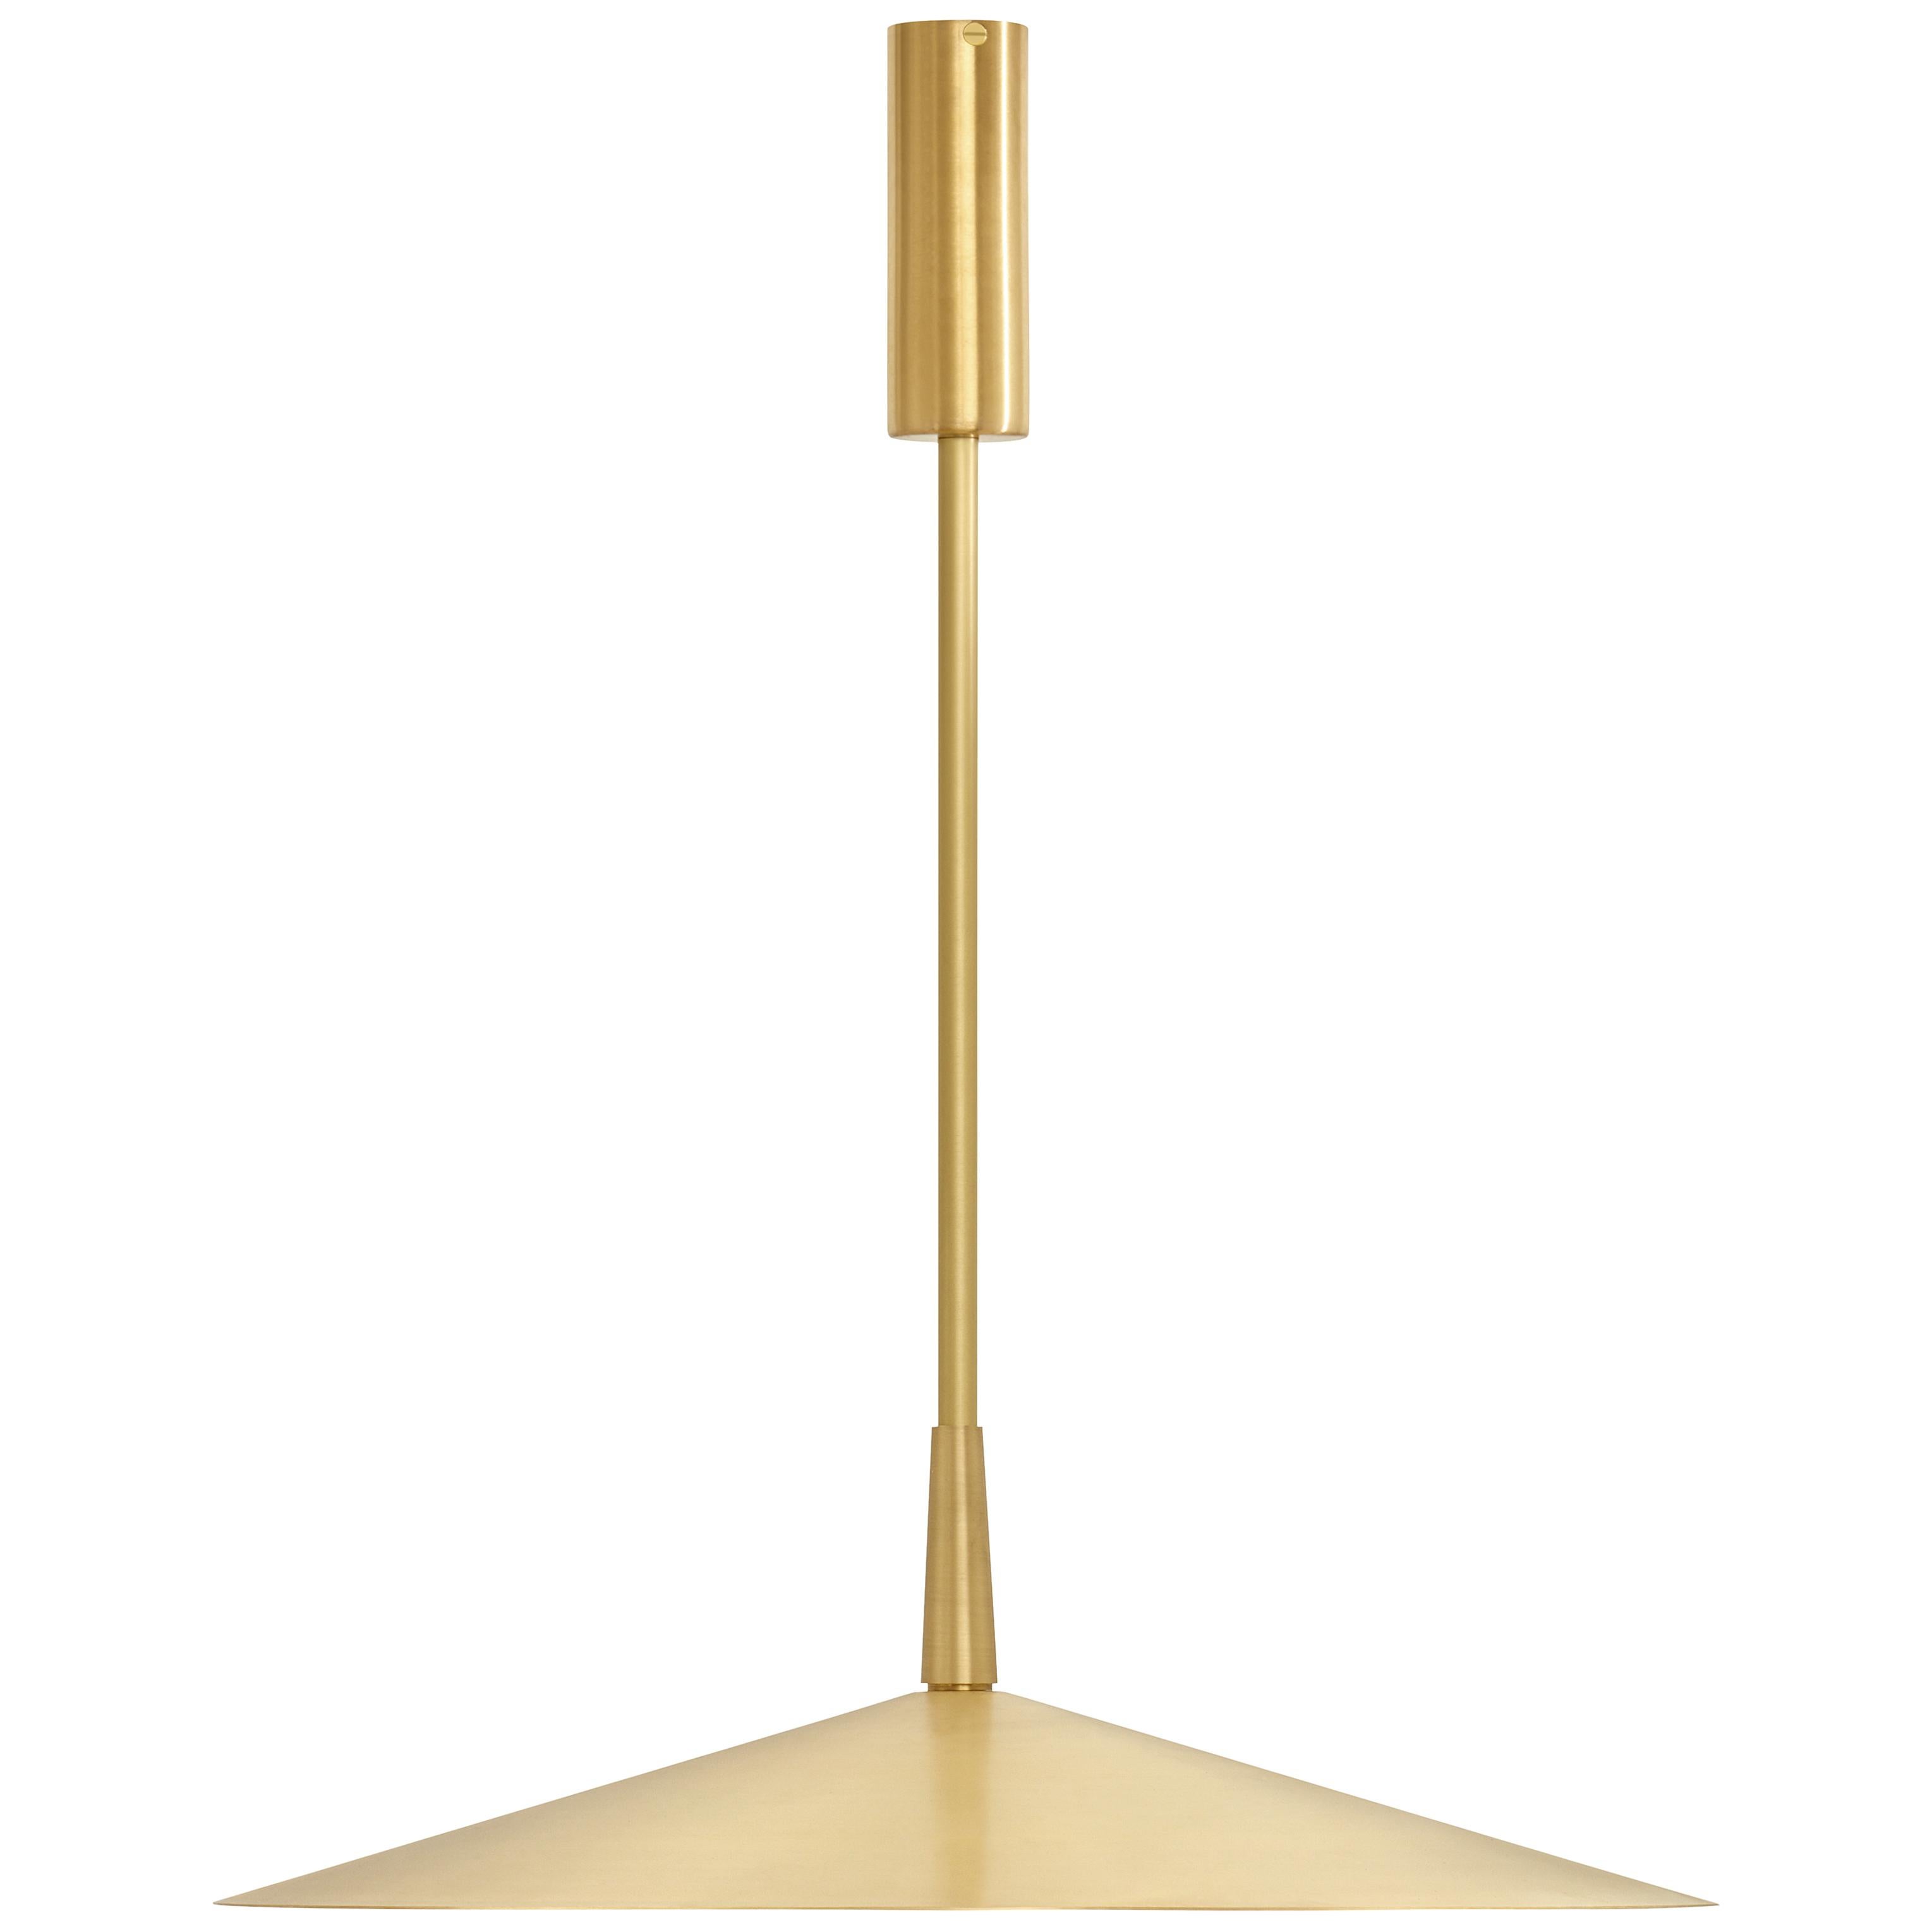 Tinto Medium pendant by CTO Lighting
Materials: satin brass 
Also available in dark bronze shade and finial with satin brass drop rod and ceiling rose
satin brass shade and finial with dark bronze drop rod and ceiling rose
all dark bronze
all